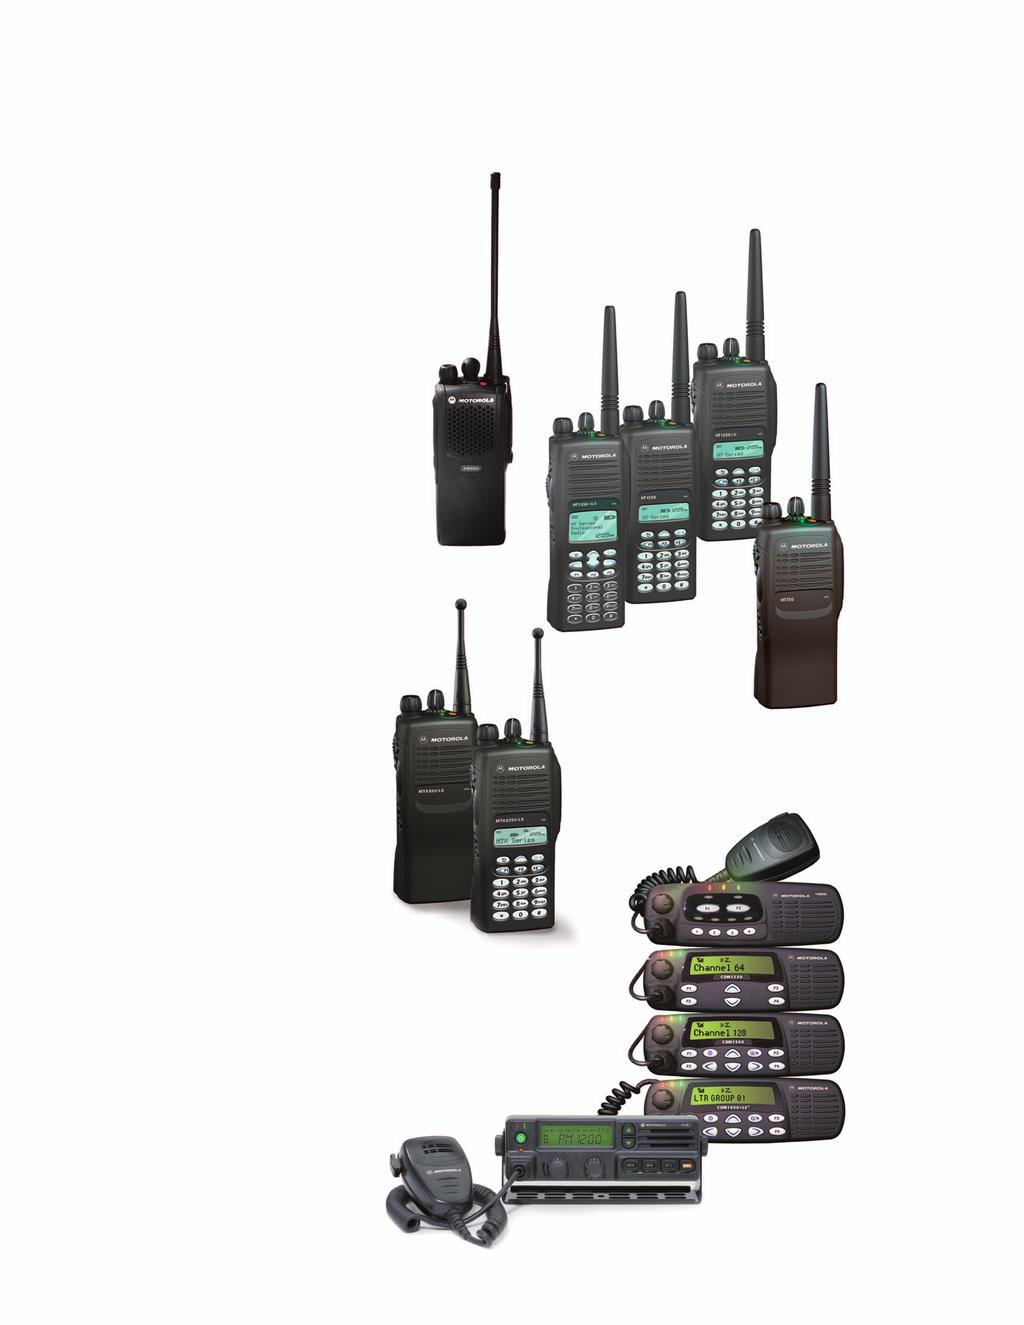 CDM SERIES MOBILES RADIOS AS TOUGH AS YOU ARE. PR860 PORTABLE The Motorola PR860 Professional Series two-way radio offers rugged design in a surprisingly lightweight package.